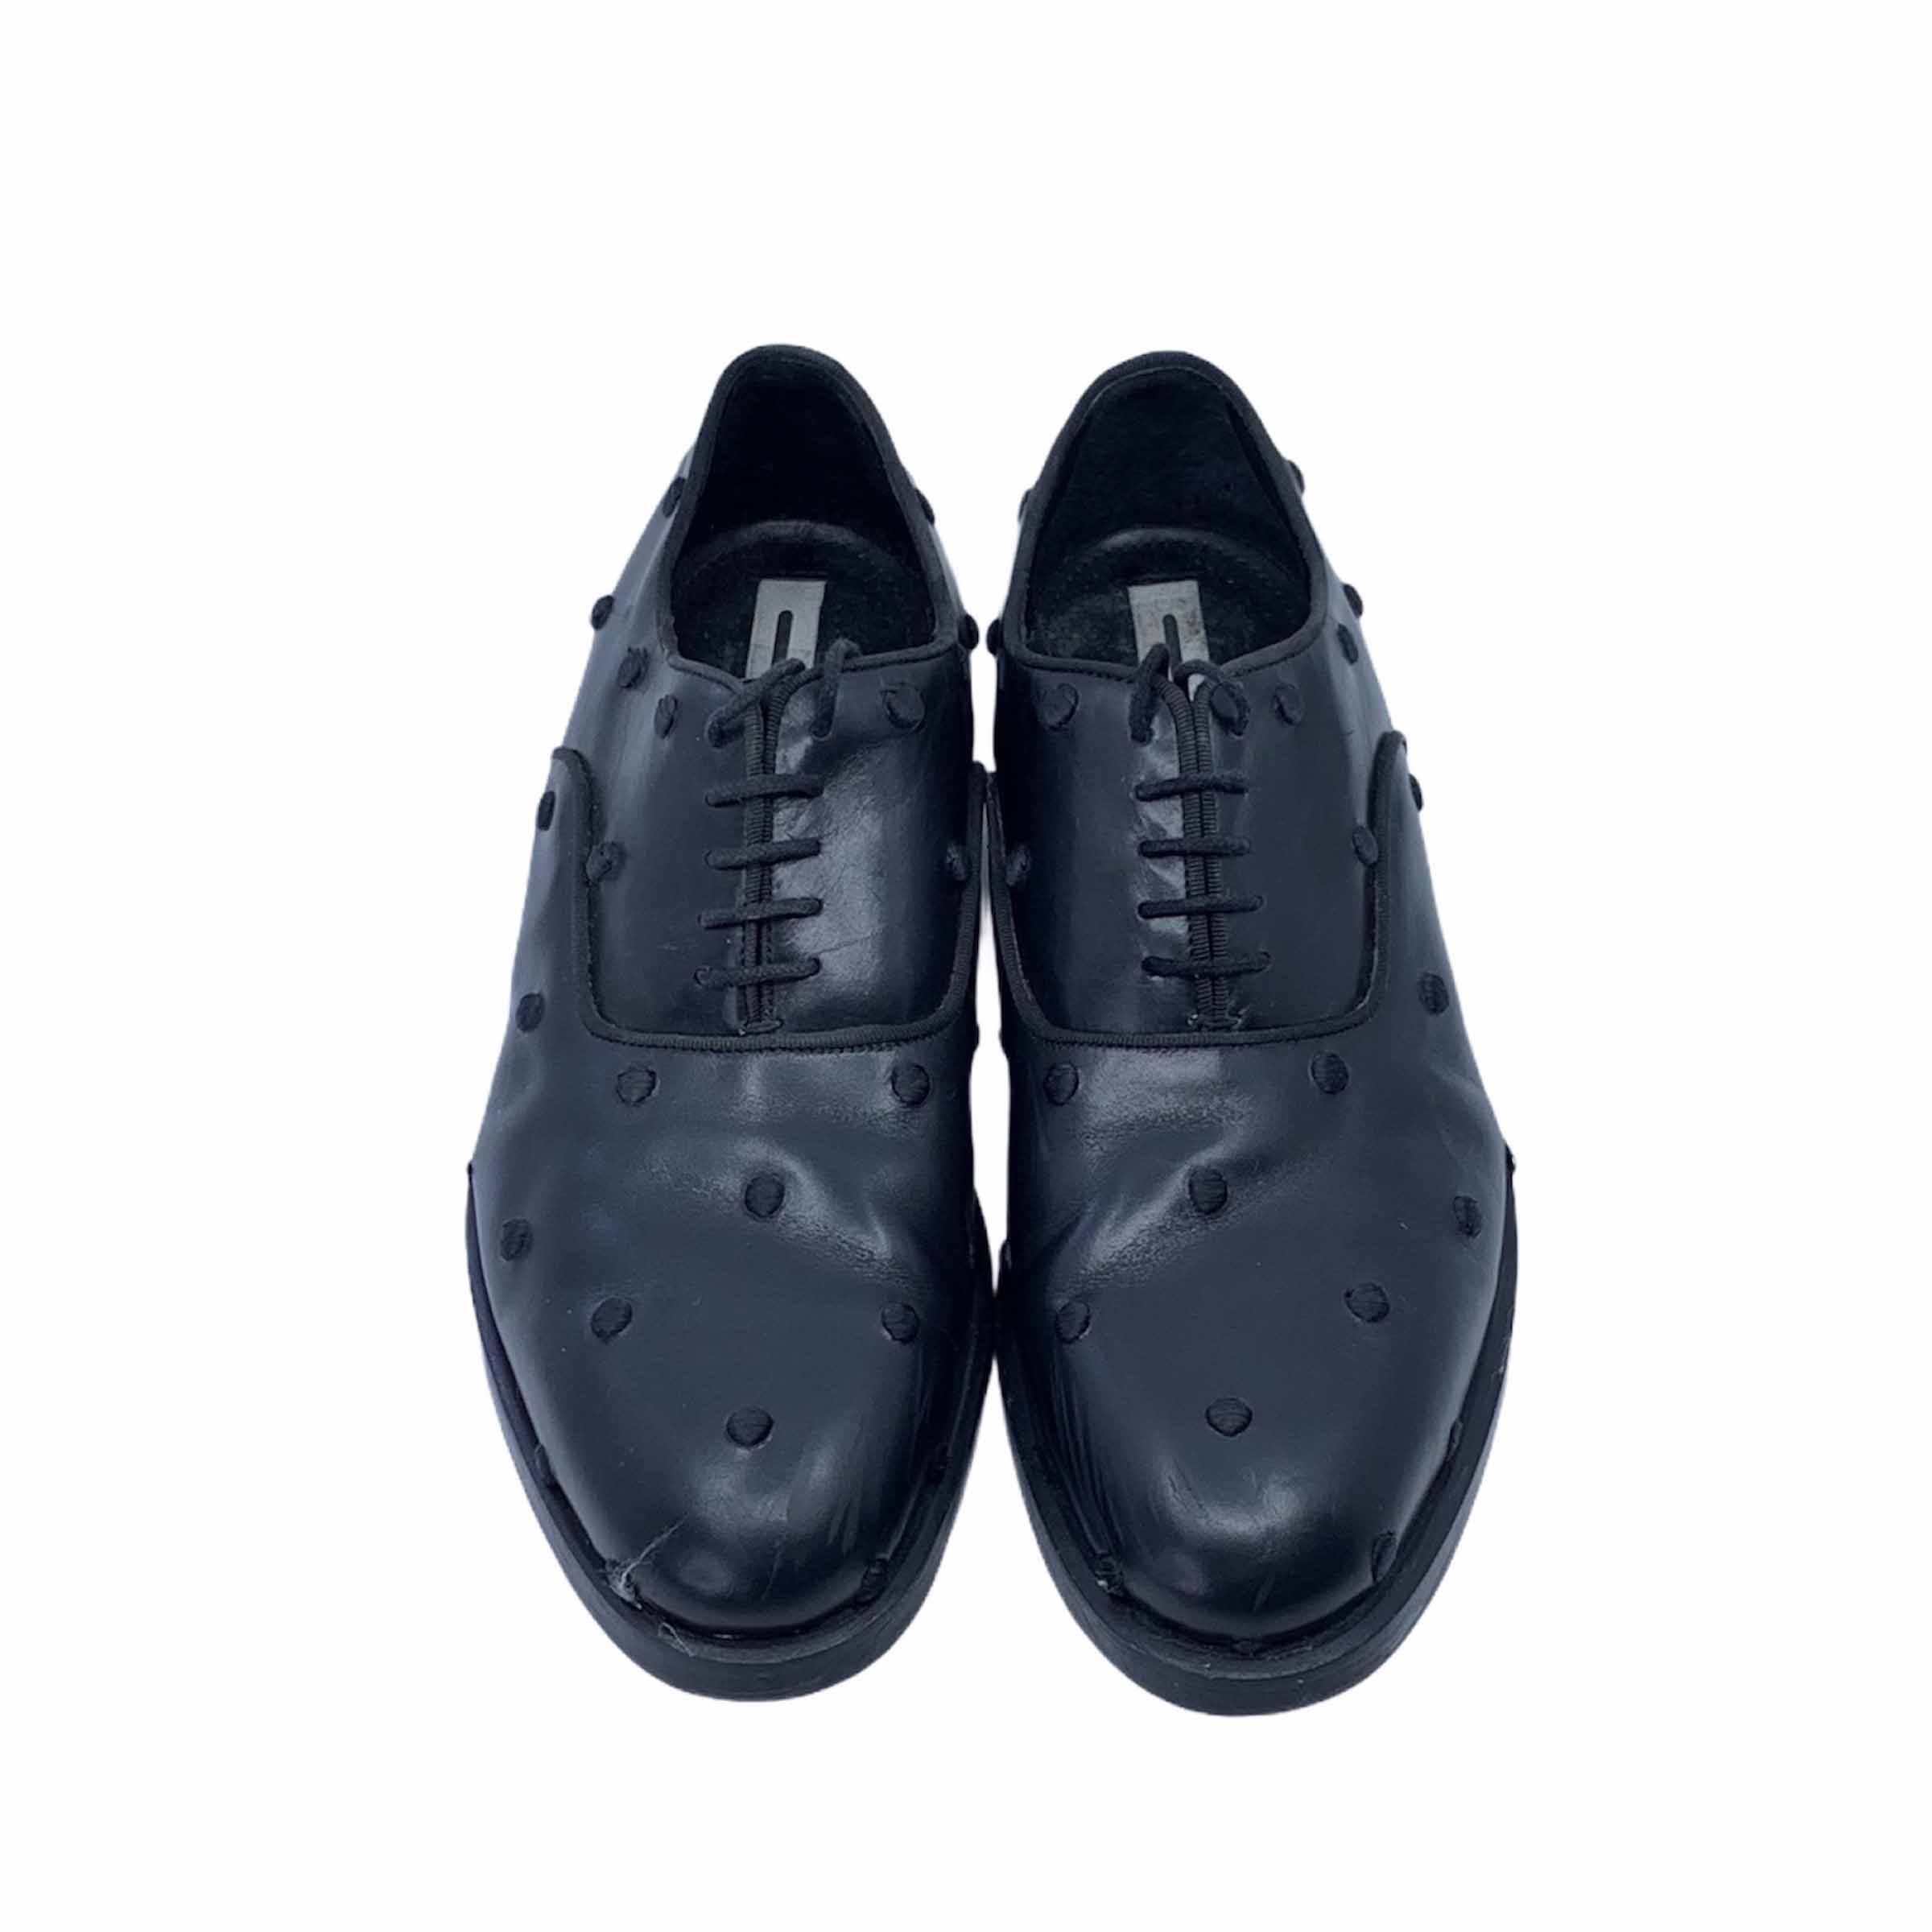 [Diego Vanassibara] Stitch Dotted Oxford Shoes - Size US8